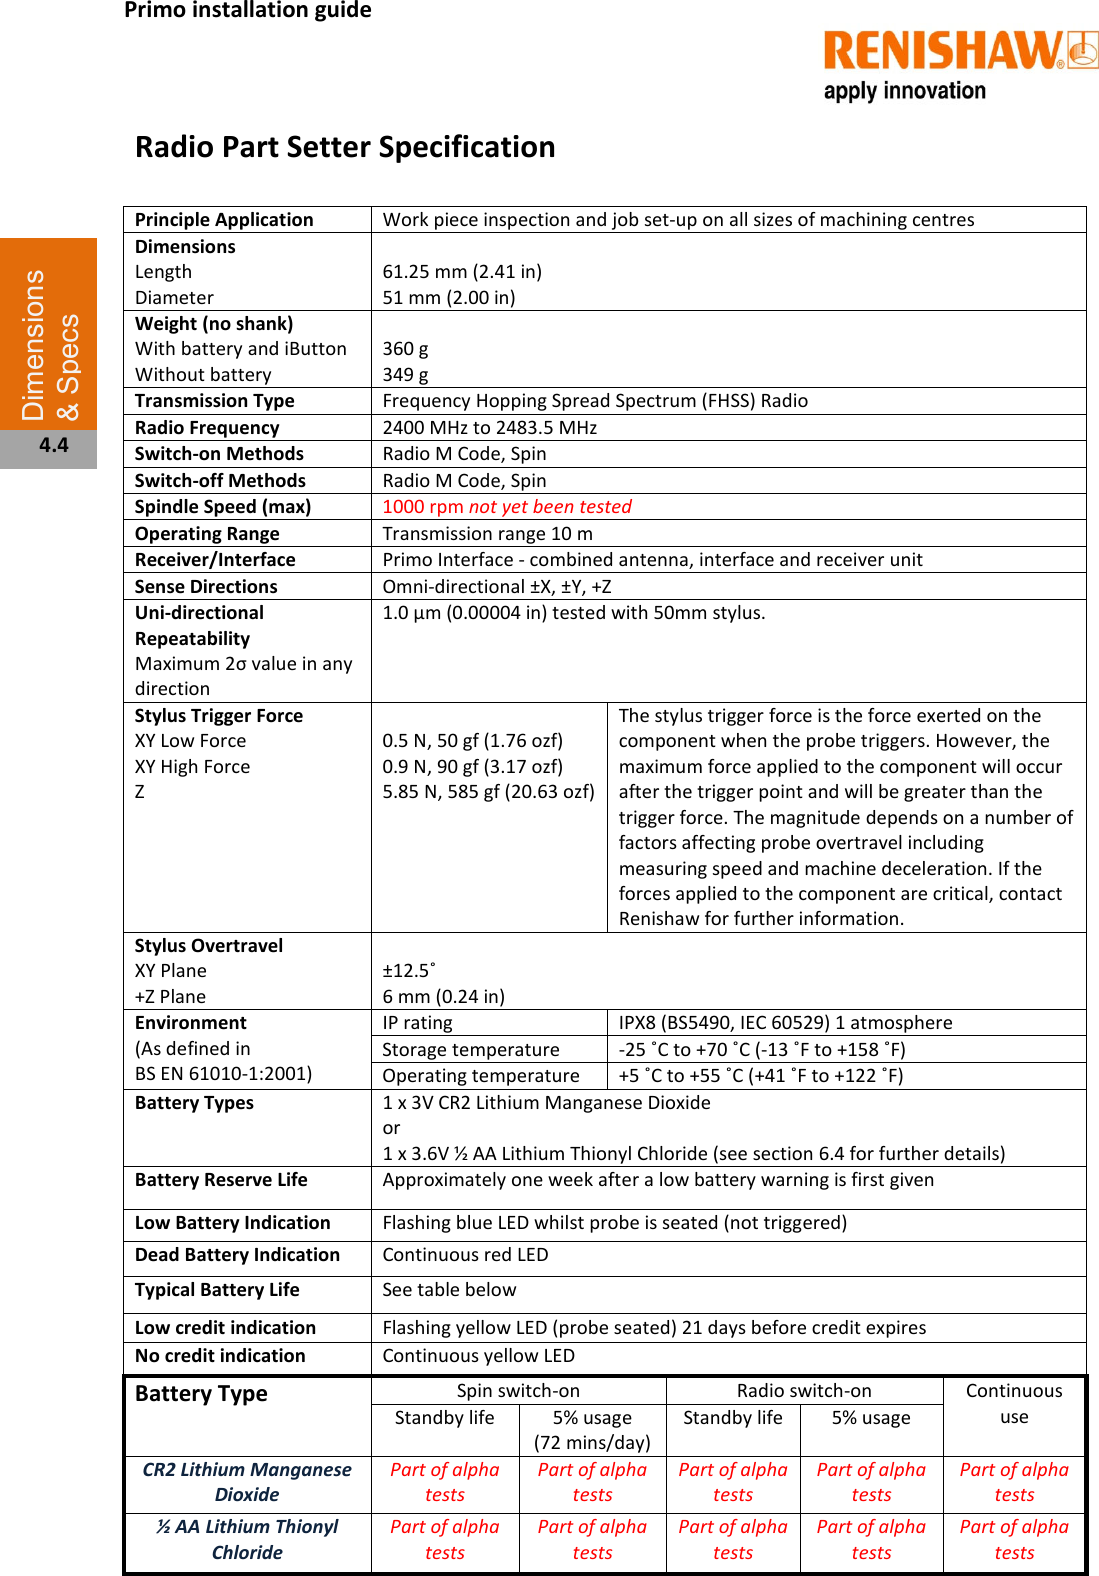   Radio Part Setter SpecificationPrinciple Application  Work piece inspection and job set-up on all sizes of machining centres Dimensions Length Diameter  61.25 mm (2.41 in) 51 mm (2.00 in) Weight (no shank) With battery and iButton Without battery  360 g 349 g Transmission Type  Frequency Hopping Spread Spectrum (FHSS) Radio Radio Frequency  2400 MHz to 2483.5 MHz Switch-on Methods  Radio M Code, Spin Switch-off Methods  Radio M Code, Spin Spindle Speed (max)  1000 rpm not yet been tested Operating Range  Transmission range 10 m Receiver/Interface  Primo Interface - combined antenna, interface and receiver unit Sense Directions  Omni-directional ±X, ±Y, +Z Uni-directional Repeatability Maximum 2σ value in any direction 1.0 µm (0.00004 in) tested with 50mm stylus. Stylus Trigger Force XY Low Force XY High Force Z  0.5 N, 50 gf (1.76 ozf) 0.9 N, 90 gf (3.17 ozf)  5.85 N, 585 gf (20.63 ozf) The stylus trigger force is the force exerted on the component when the probe triggers. However, the maximum force applied to the component will occur after the trigger point and will be greater than the trigger force. The magnitude depends on a number of factors affecting probe overtravel including measuring speed and machine deceleration. If the forces applied to the component are critical, contact Renishaw for further information. Stylus Overtravel  XY Plane +Z Plane  ±12.5˚ 6 mm (0.24 in) Environment (As defined in  BS EN 61010-1:2001) IP rating  IPX8 (BS5490, IEC 60529) 1 atmosphere Storage temperature  -25 ˚C to +70 ˚C (-13 ˚F to +158 ˚F) Operating temperature  +5 ˚C to +55 ˚C (+41 ˚F to +122 ˚F) Battery Types  1 x 3V CR2 Lithium Manganese Dioxide or 1 x 3.6V ½ AA Lithium Thionyl Chloride (see section 6.4 for further details) Battery Reserve Life  Approximately one week after a low battery warning is first given Low Battery Indication  Flashing blue LED whilst probe is seated (not triggered) Dead Battery Indication  Continuous red LED Typical Battery Life  See table below Low credit indication  Flashing yellow LED (probe seated) 21 days before credit expires No credit indication  Continuous yellow LED Battery Type Spin switch-on  Radio switch-on  Continuous use Standby life 5% usage           (72 mins/day) Standby life  5% usage CR2 Lithium Manganese Dioxide Part of alpha tests Part of alpha tests Part of alpha tests Part of alpha tests Part of alpha tests ½ AA Lithium Thionyl Chloride Part of alpha tests Part of alpha tests Part of alpha tests Part of alpha tests Part of alpha tests Primo installation guide Dimensions &amp; Specs  4.4 